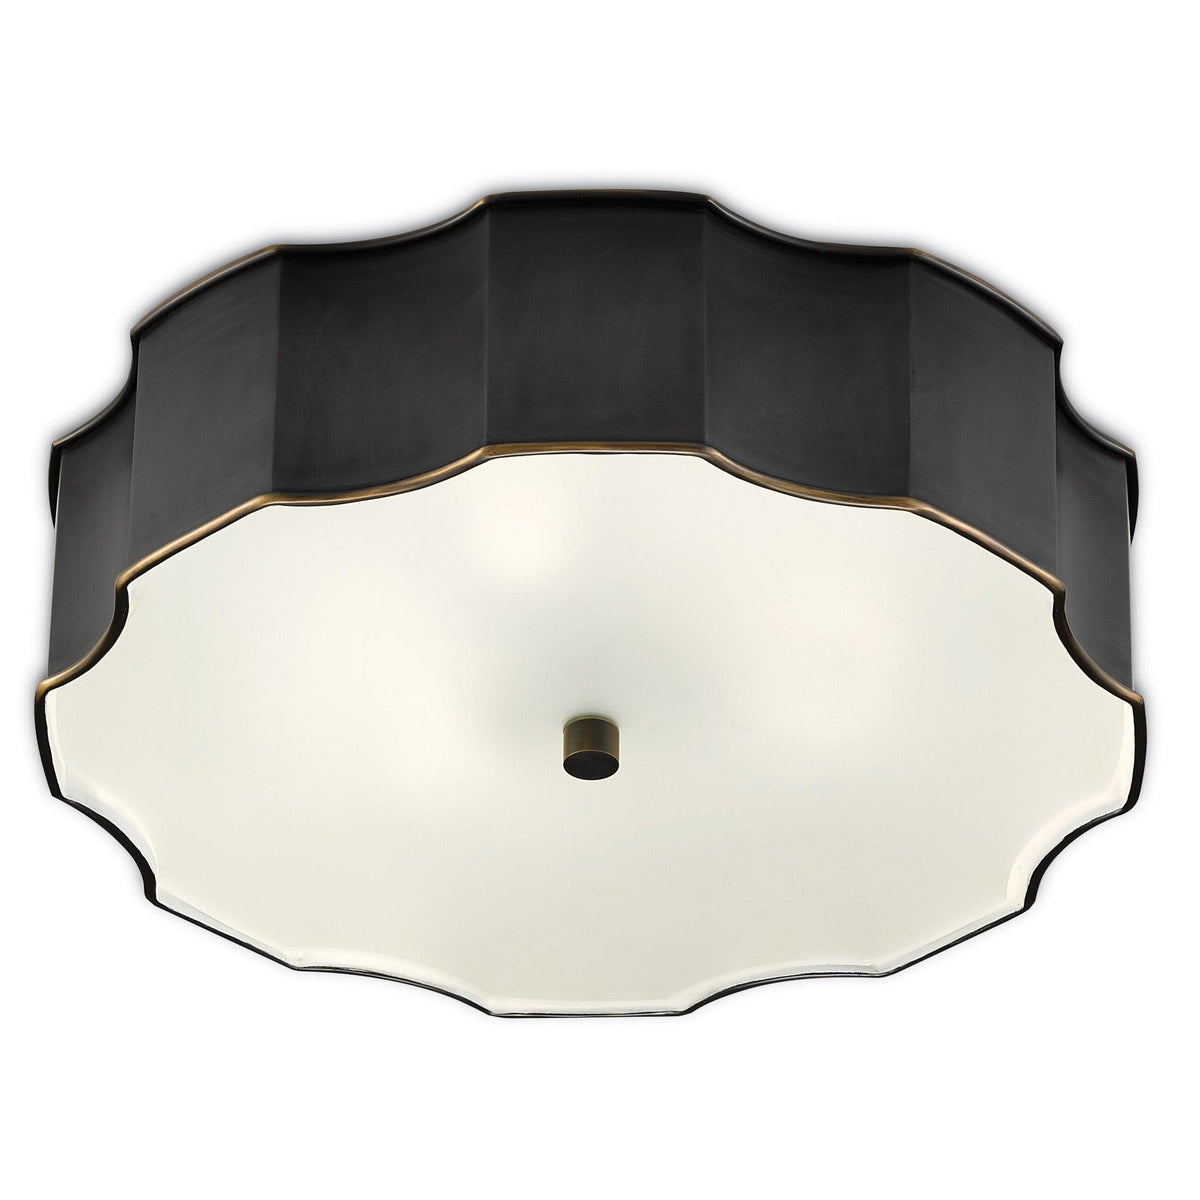 Currey and Company - Wexford Flush Mount - 9999-0046 | Montreal Lighting & Hardware